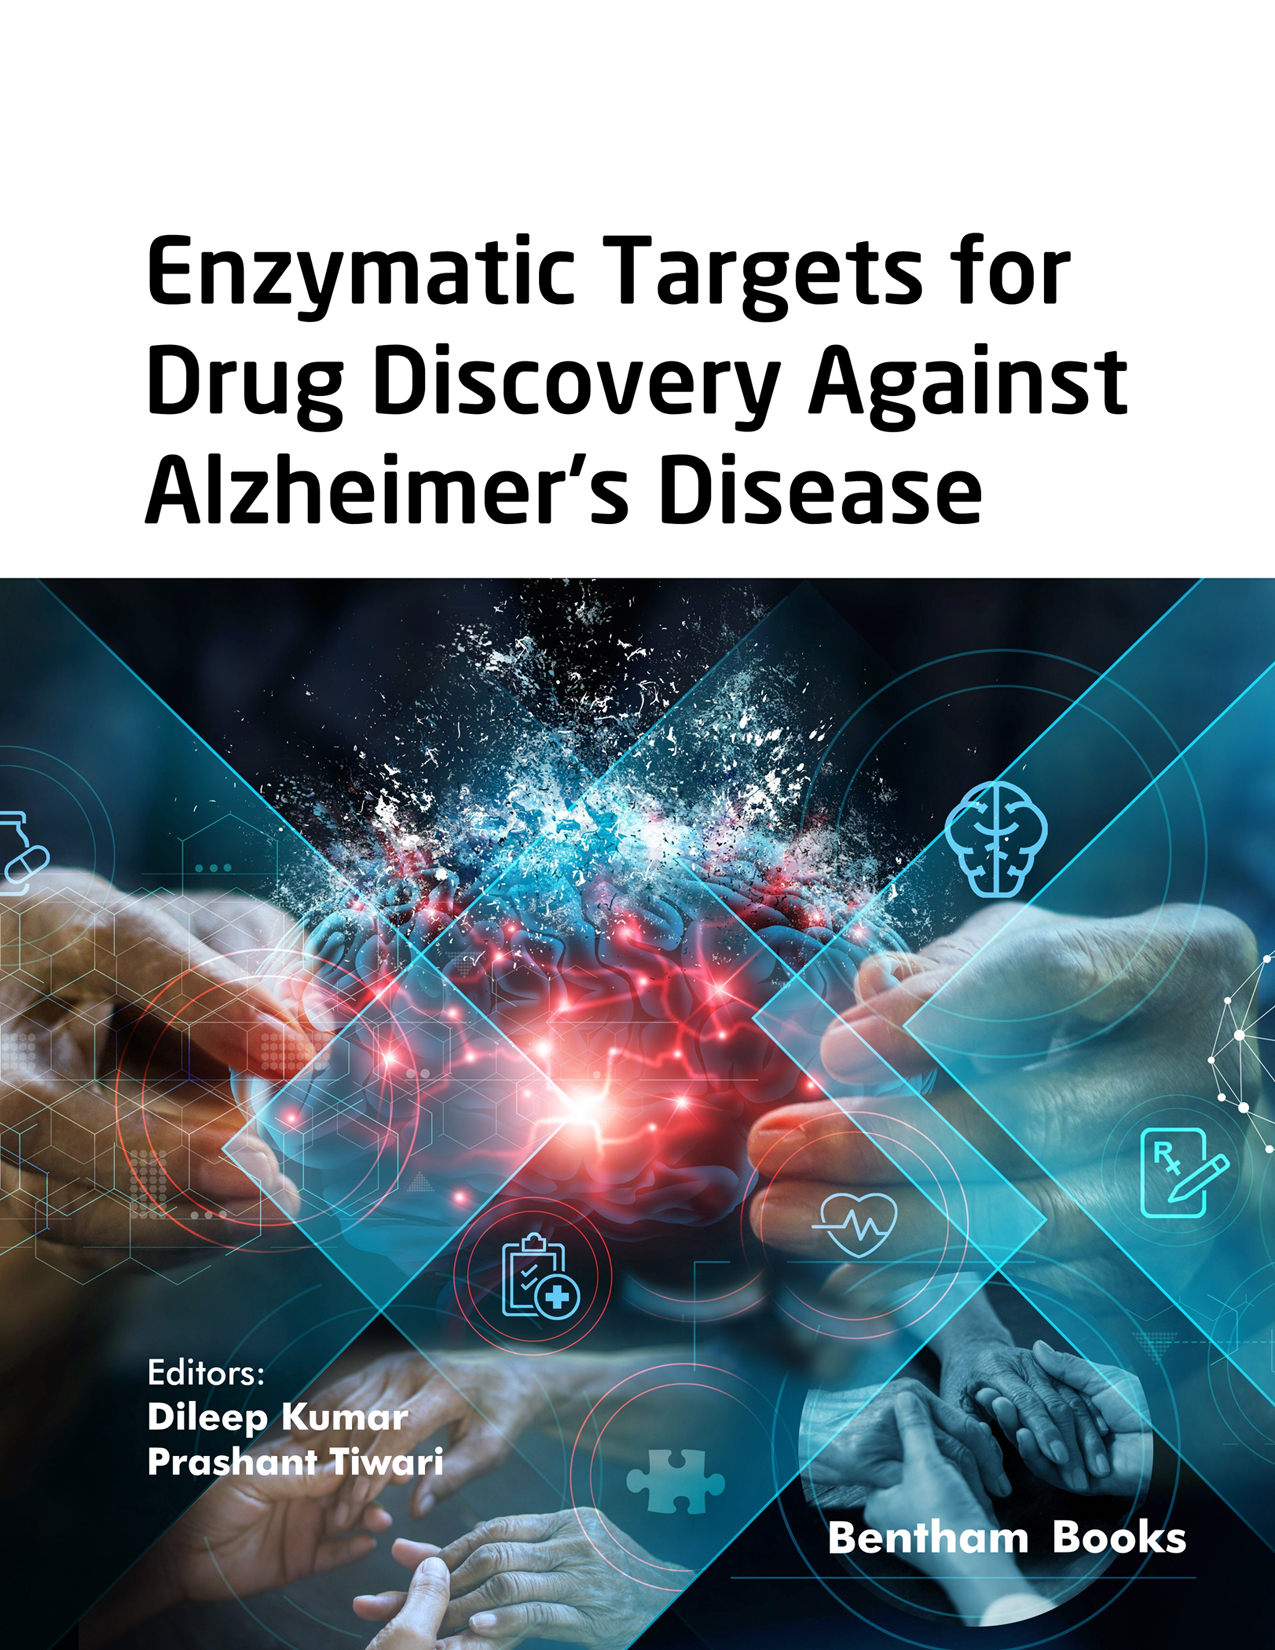 Enzymatic Targets for Drug Discovery Against Alzheimer's Disease